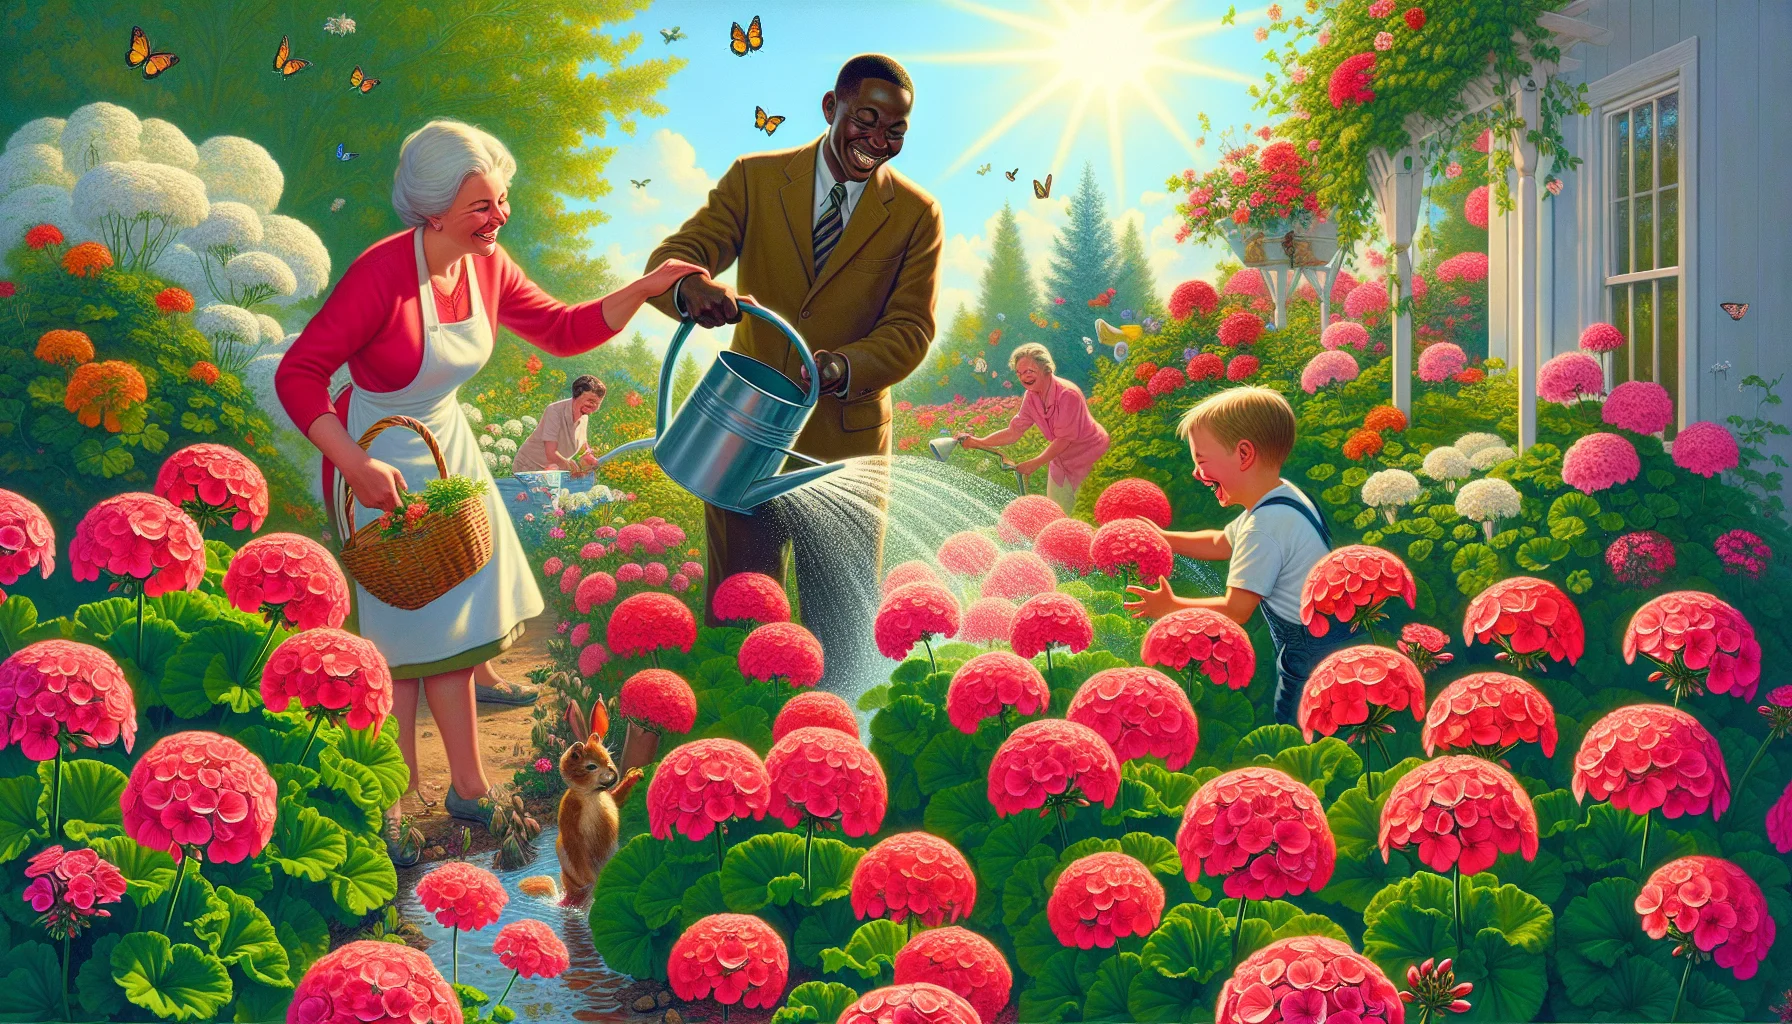 Fine art style image of a humorous scene depicting gardening with geranium perennials. The scene features a Caucasian woman and a Black man, both smiling and tending to a garden abundant with vibrant geranium flowers which are humorously oversized, giving the scene an amusing twist. On one side of the garden, we see a mixed race child gleefully watering the flowers, the water sprinkling onto the flowers creates a mini rainbow adding to the charm. The sun is shining bright overhead, the garden teems with life, small creatures like bumblebees and butterflies are seen flying around, contributing to the lively, delightful ambiance.